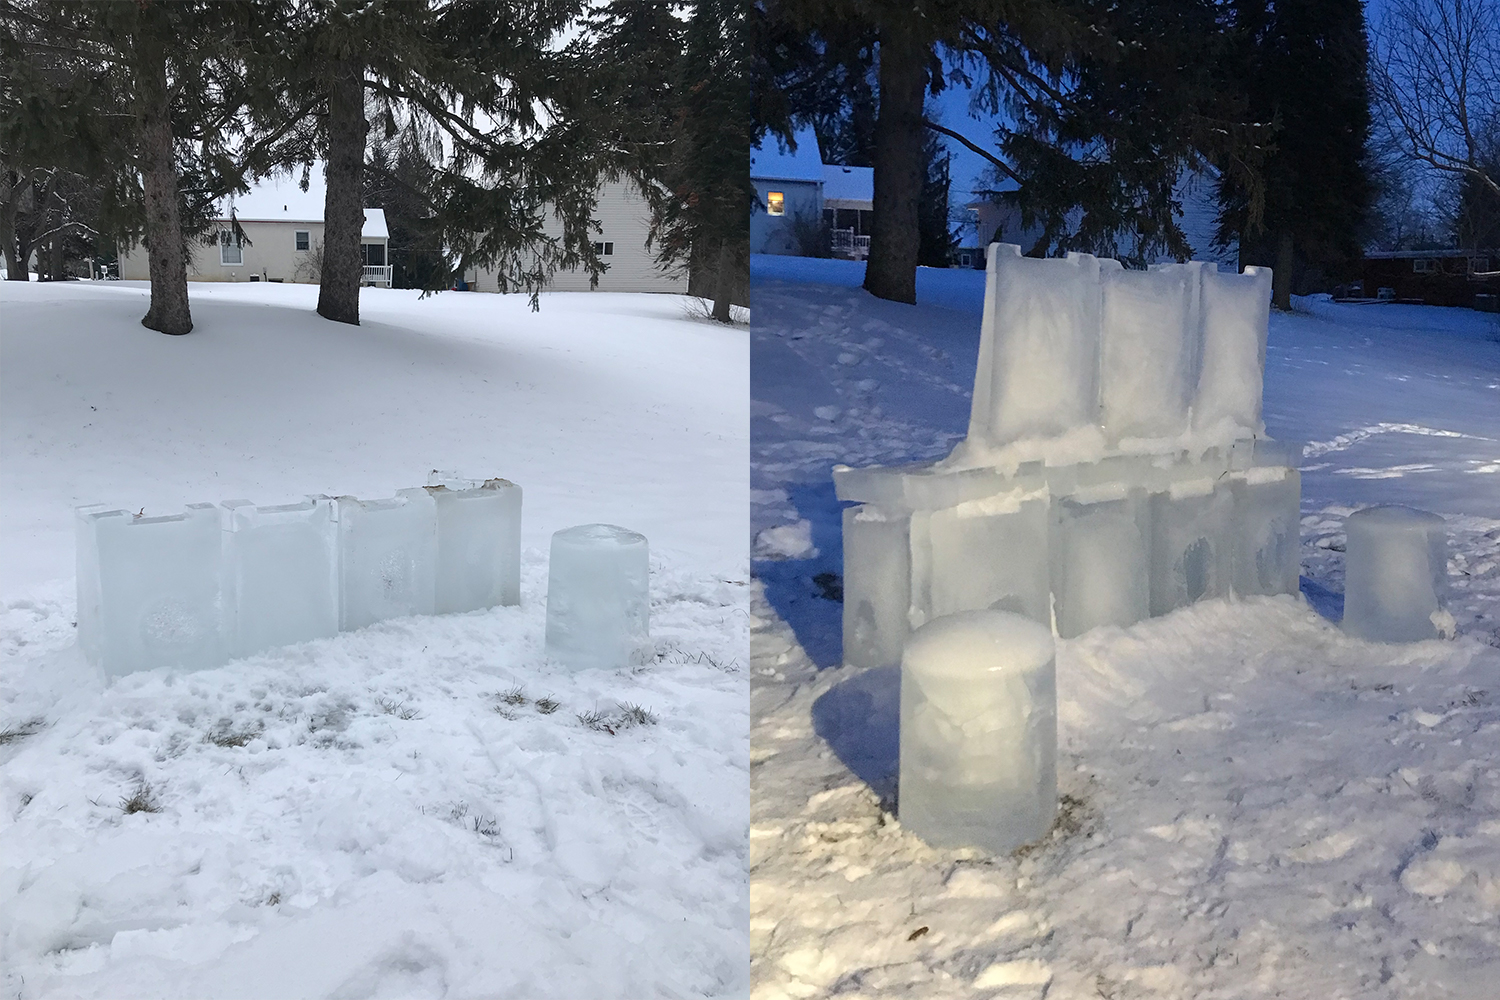 Two stages of making an ice bar, the first tier in the snow on the left and the second tier with ice blocks on the right